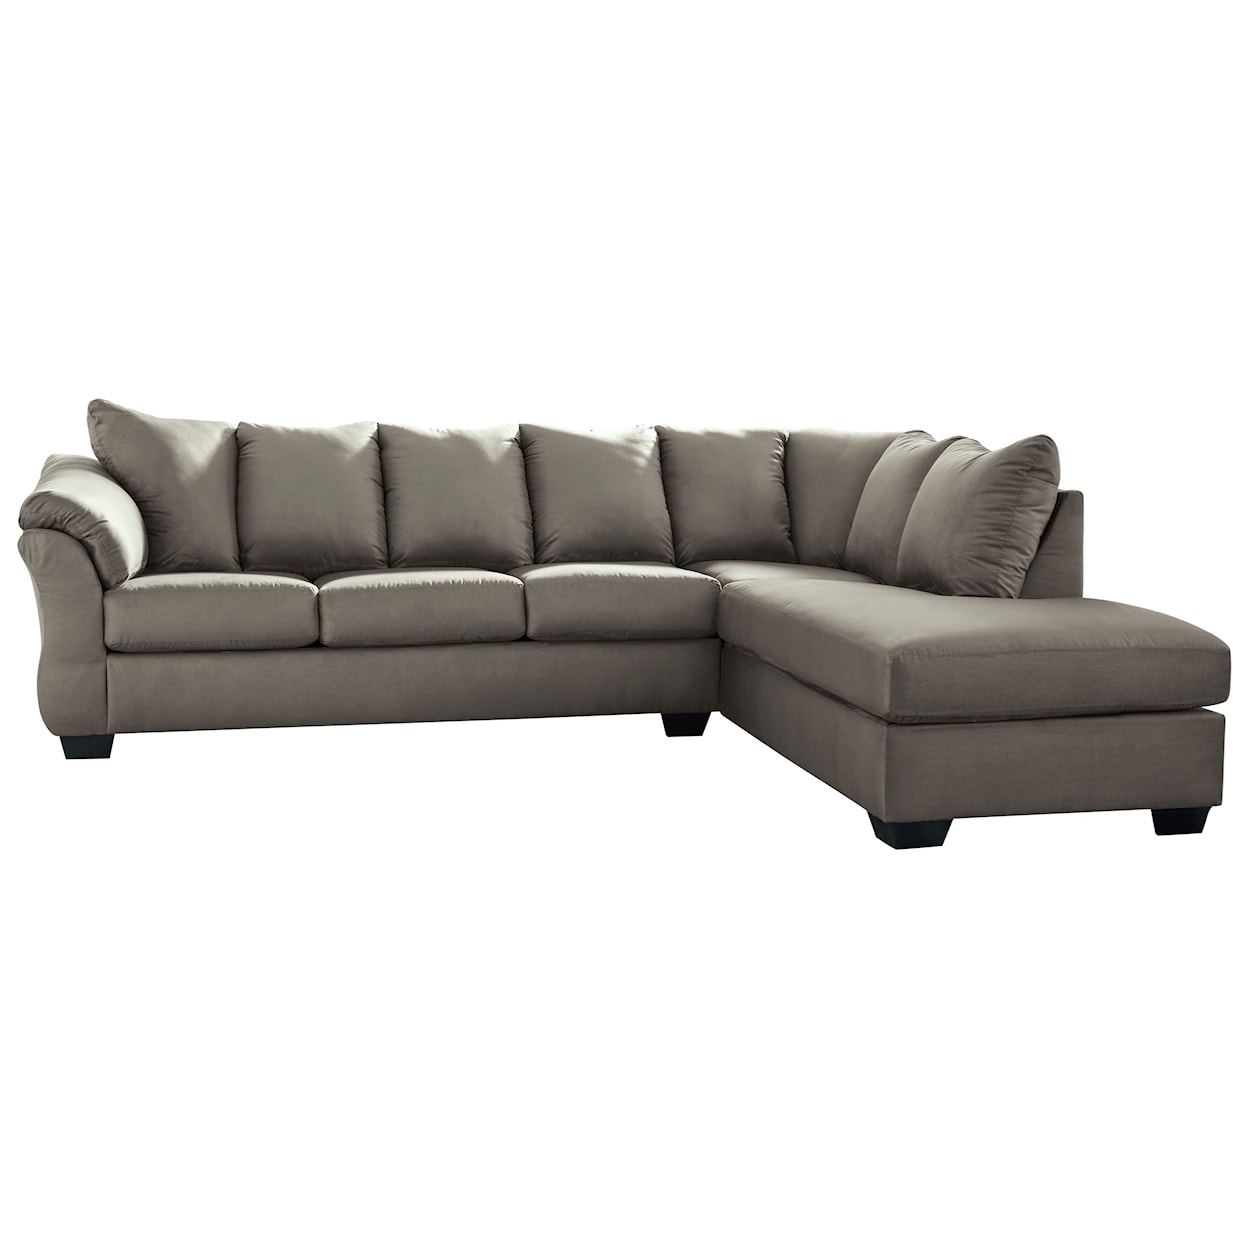 Signature Design by Ashley Darcy 2-Piece Sectional Sofa